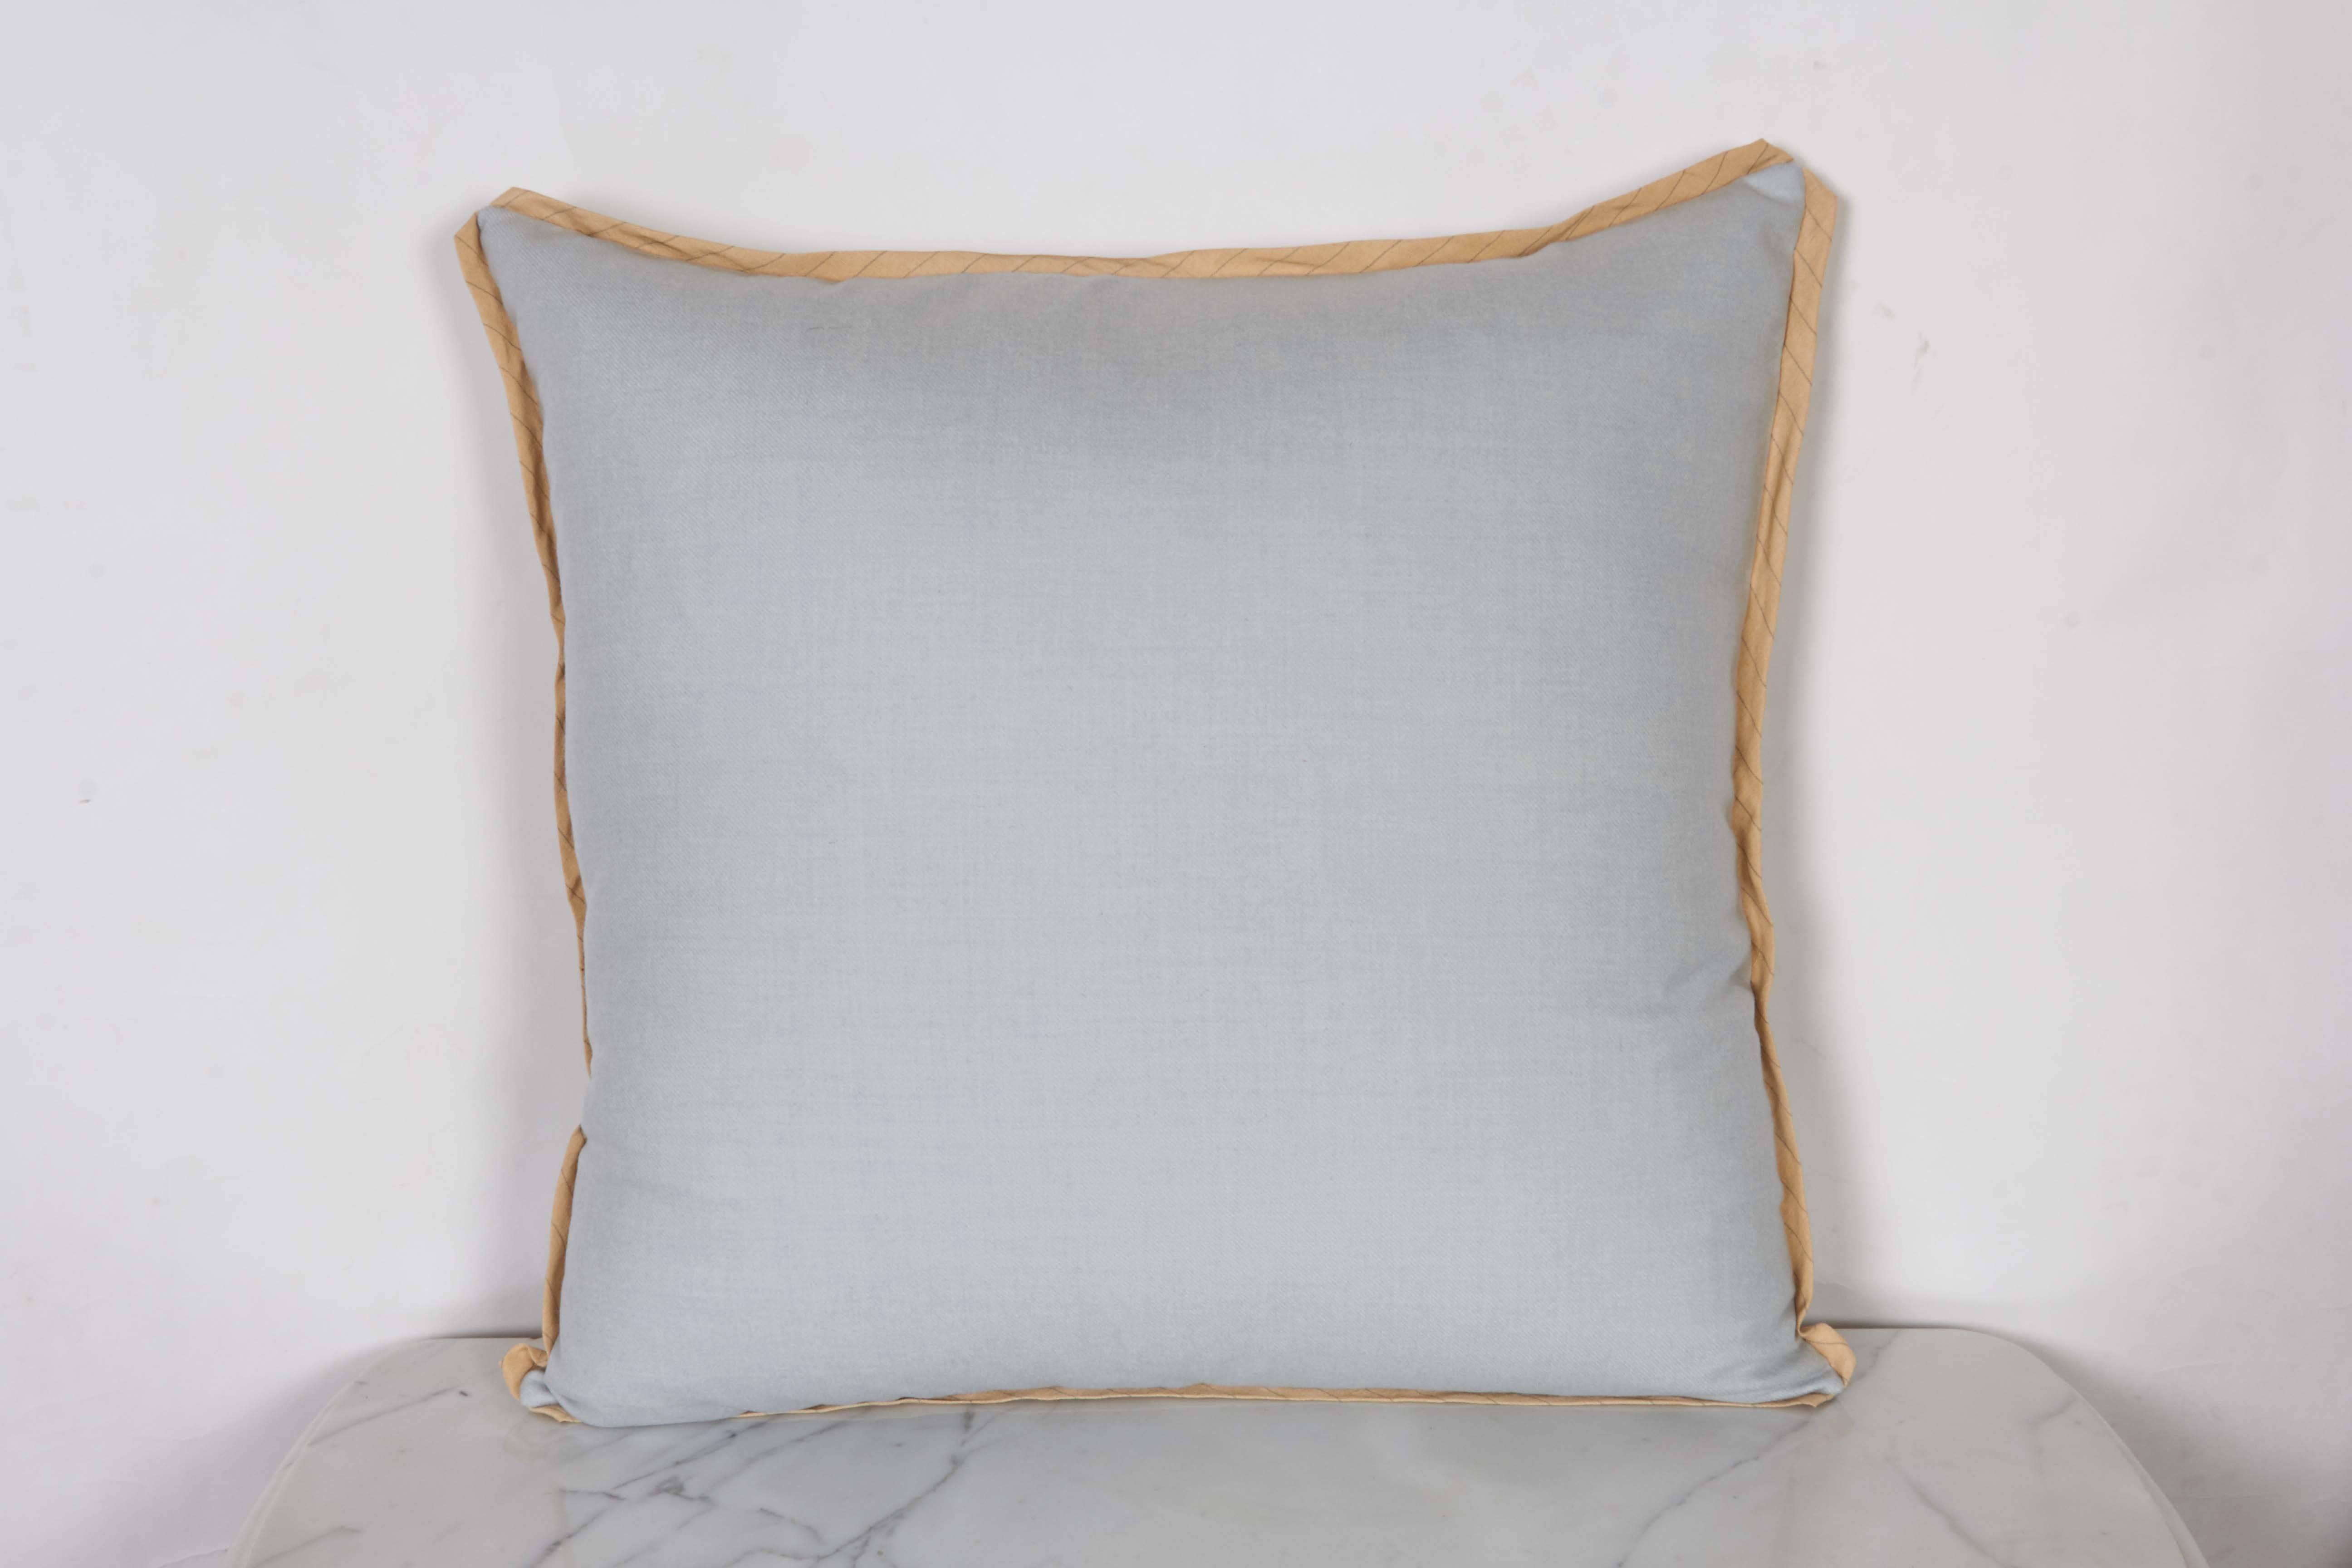 American Set of Fortuny Fabric Cushions in the Dandolo Pattern